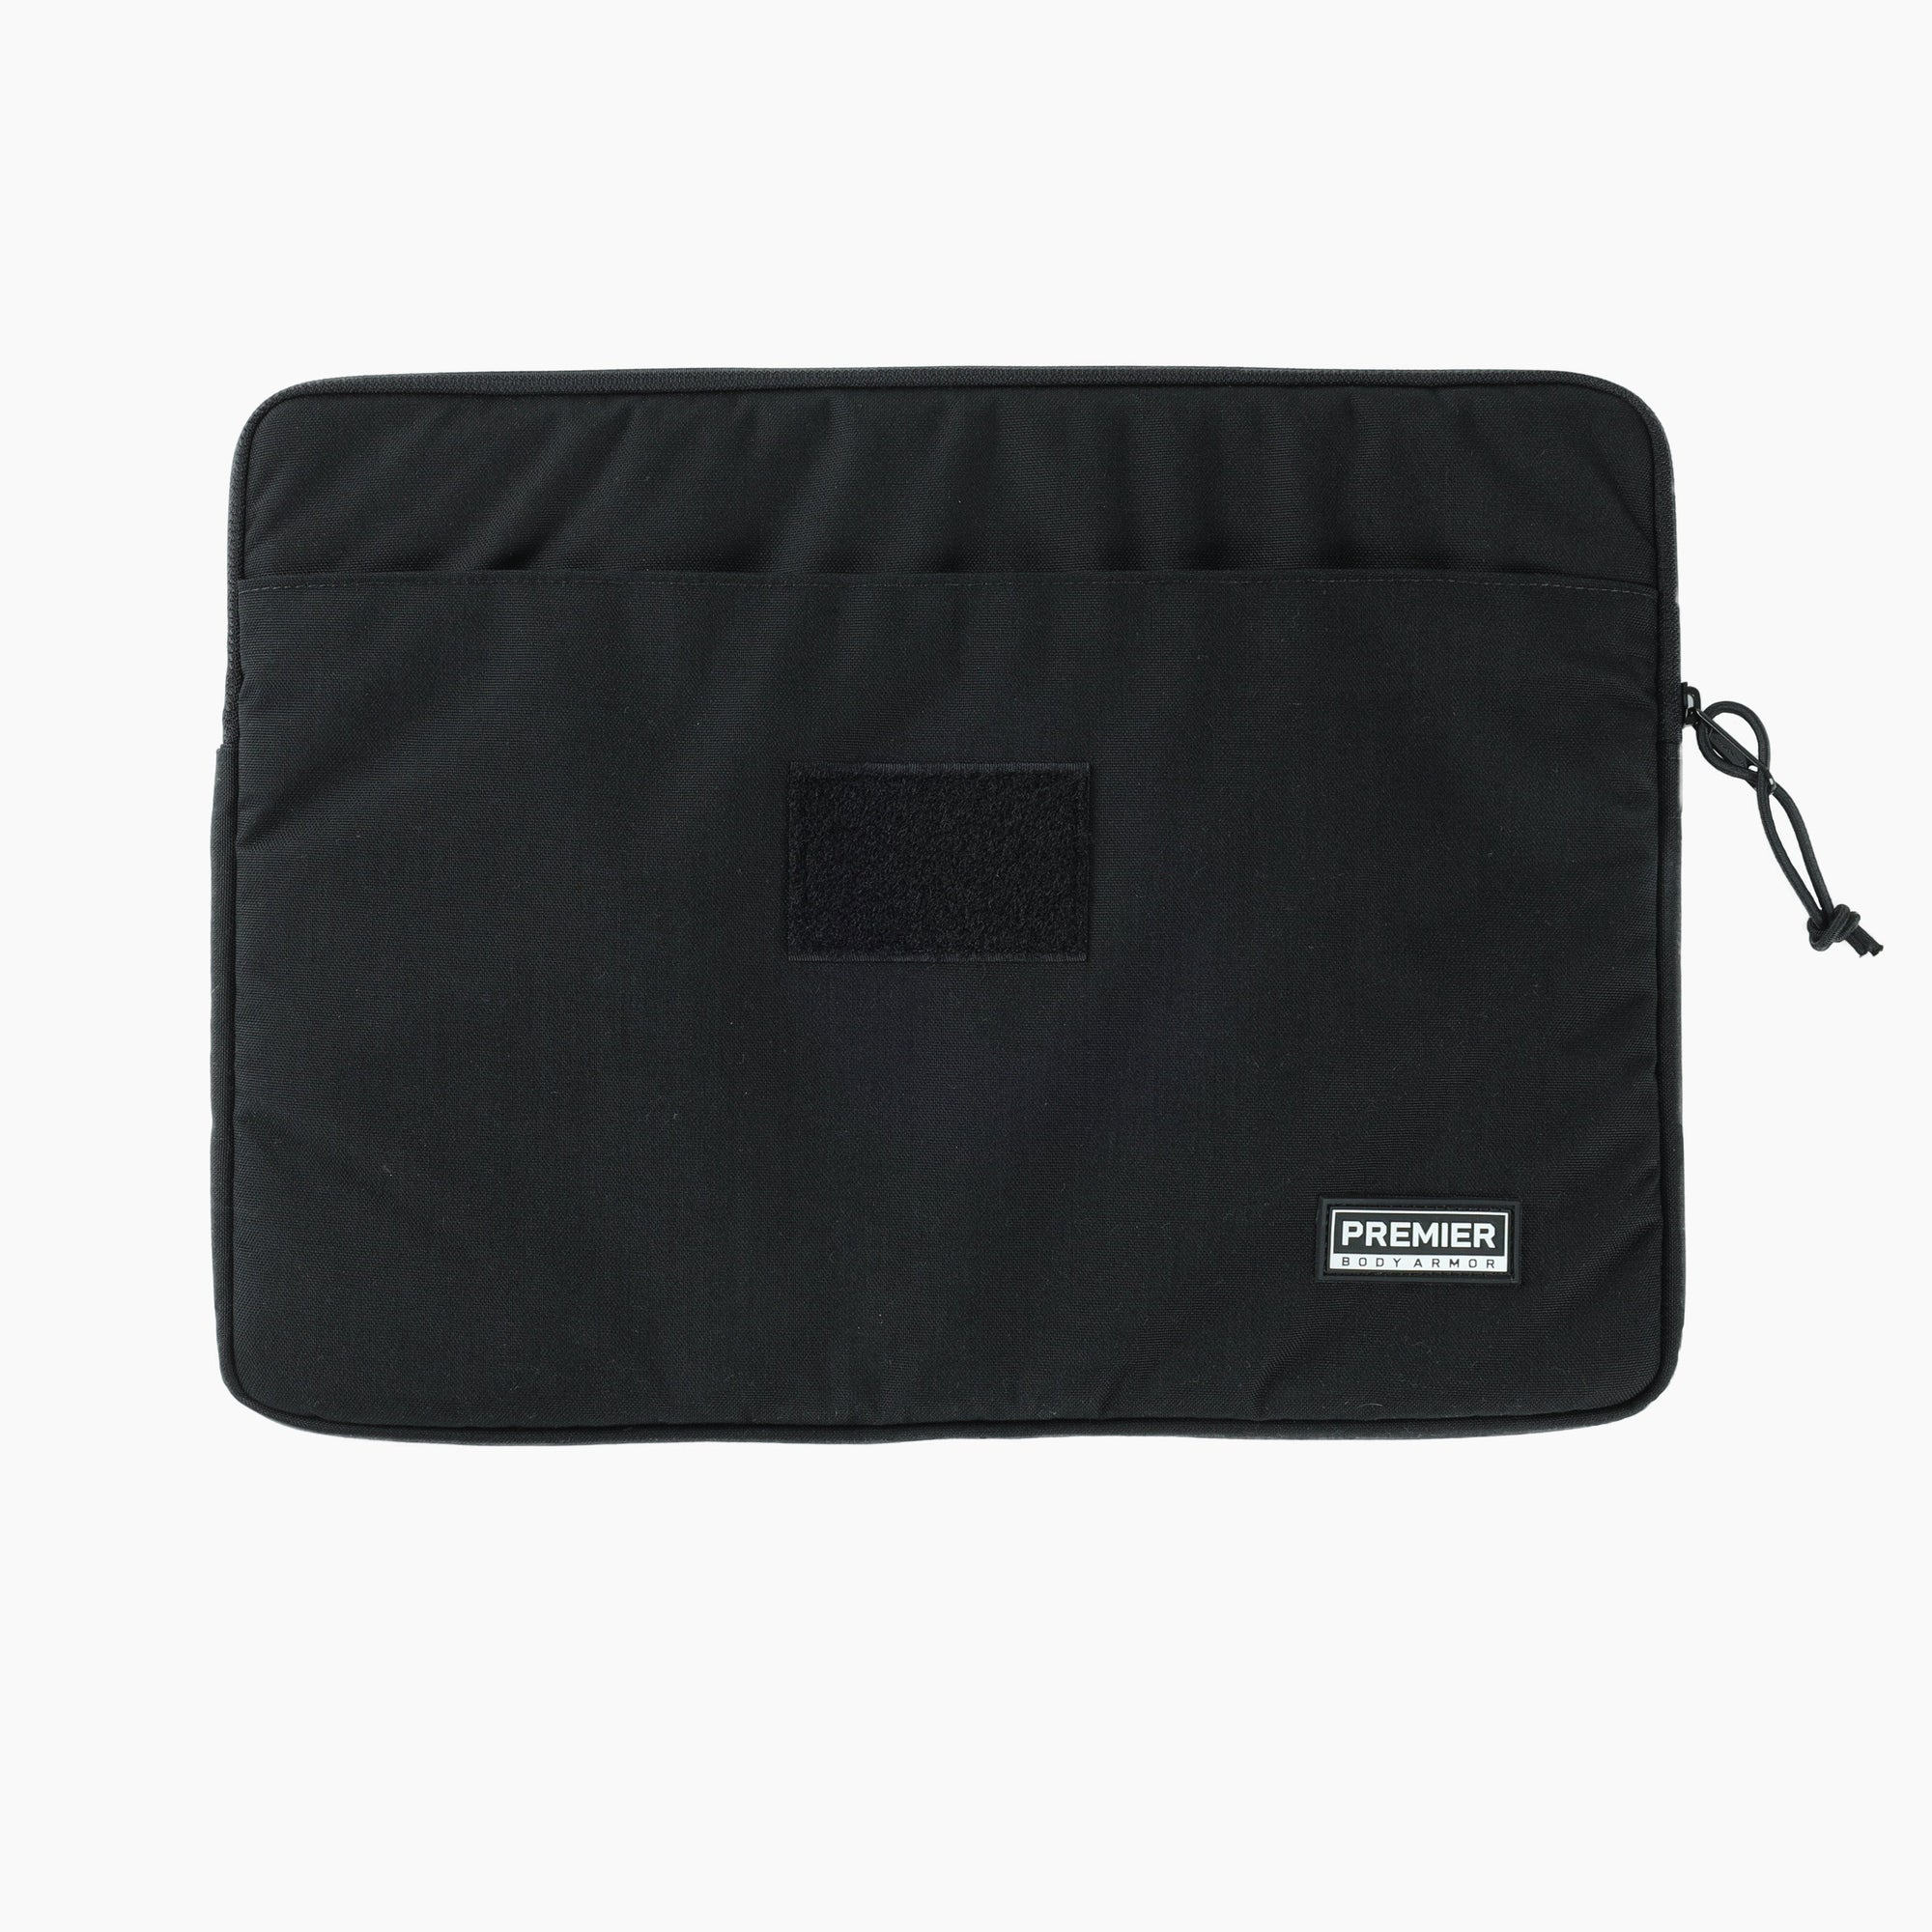 Bulletproof laptop case available in Grey. Carry level 3a armor protection with you in your bag. 